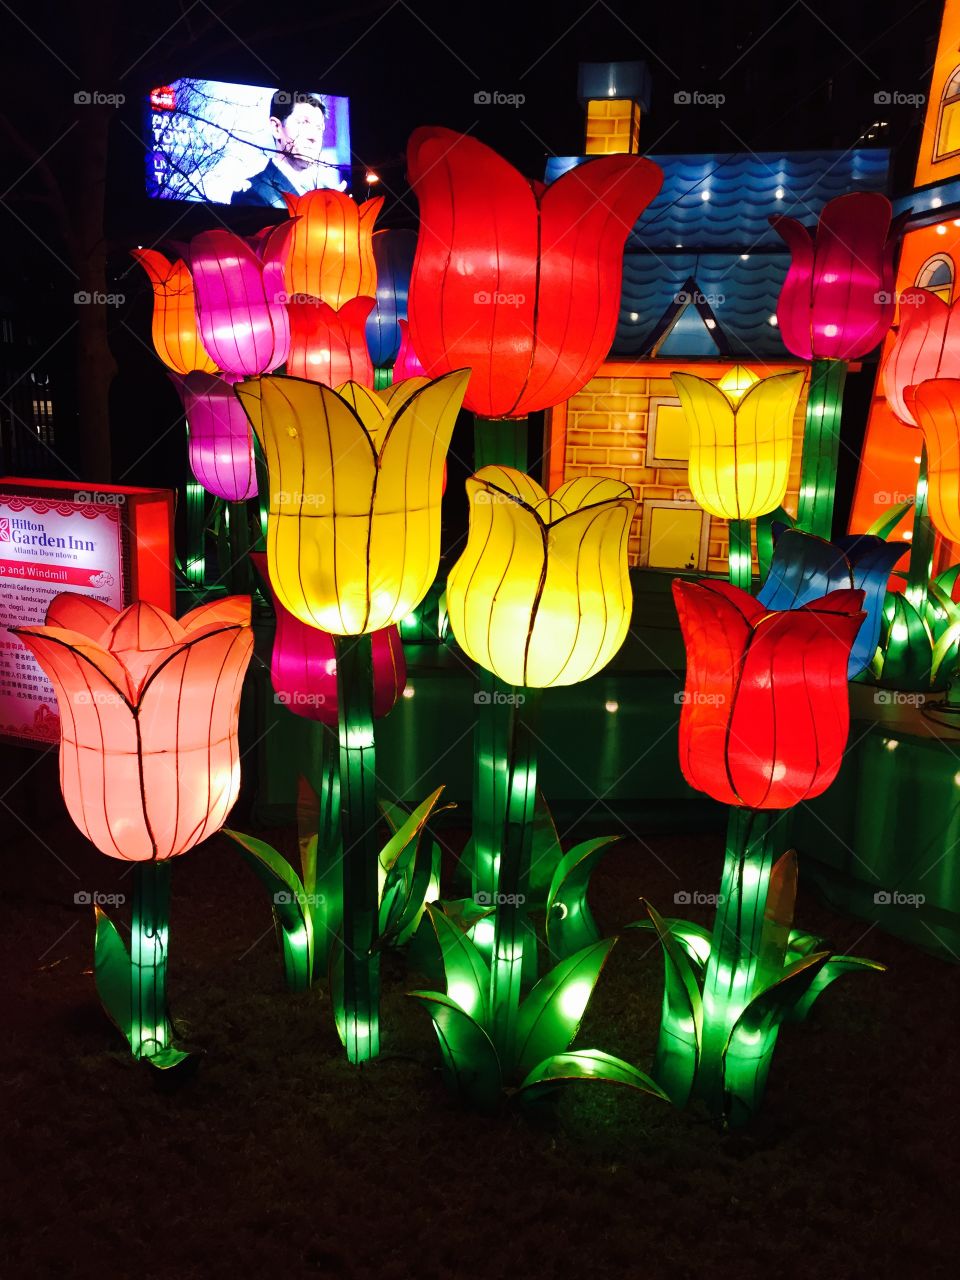 Chinese Lantern Show from Centennial Olympic Park in Atlanta, Georgia. Beautiful symmetry and colors. Tulips 